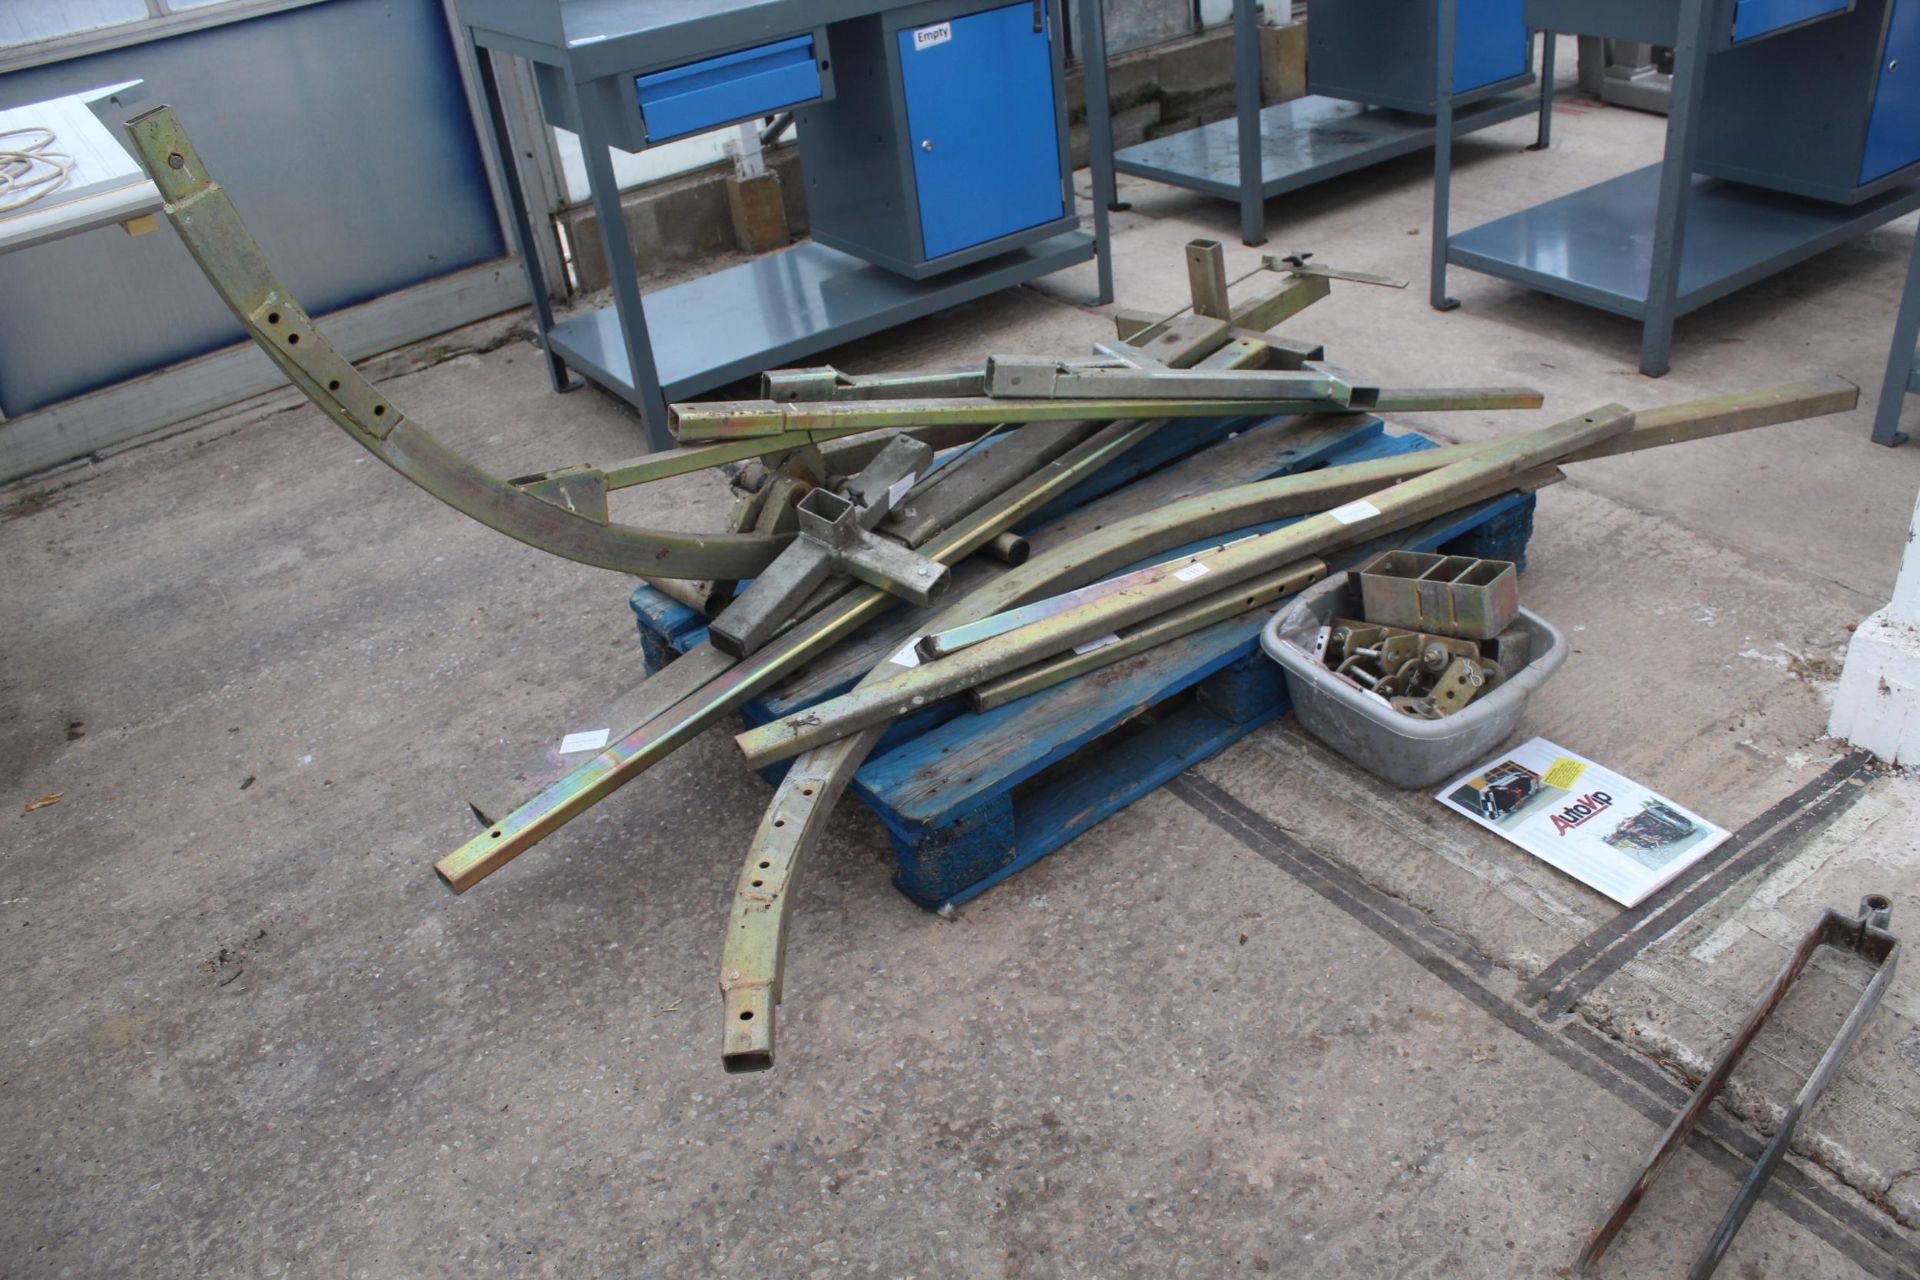 AN AUTOVIP CAR ROLLER CAGE (ROLLS A CAR TO APPROX 85 DEGREES) BELIEVED COMPLETE - NO VAT